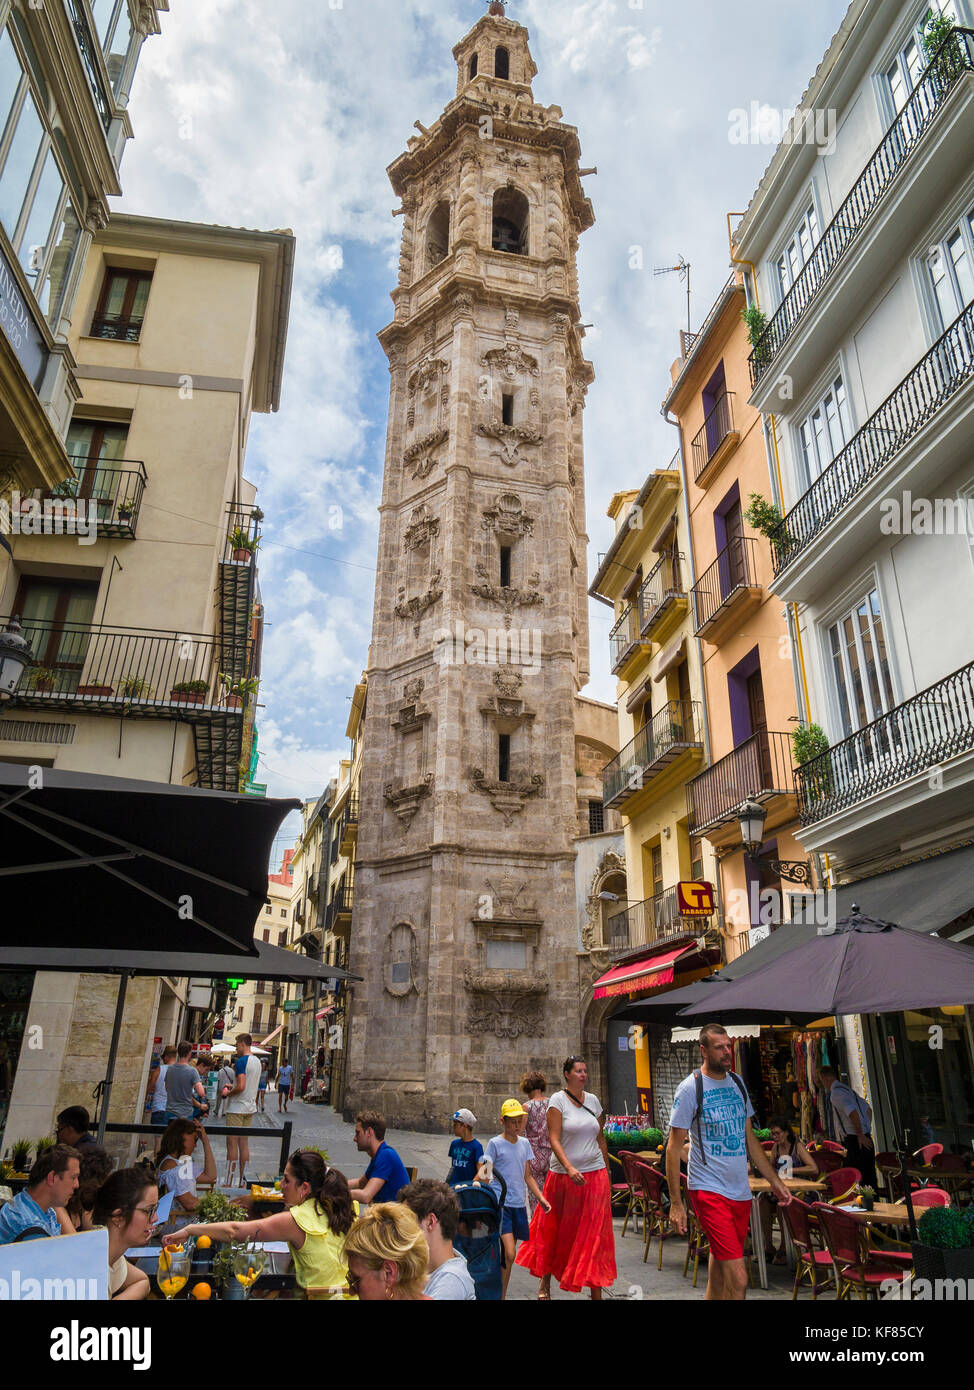 The Bell tower of Santa Catalina Church (Iglesia y torre de Santa Catalina) in the old town of Valencia, Spain Stock Photo